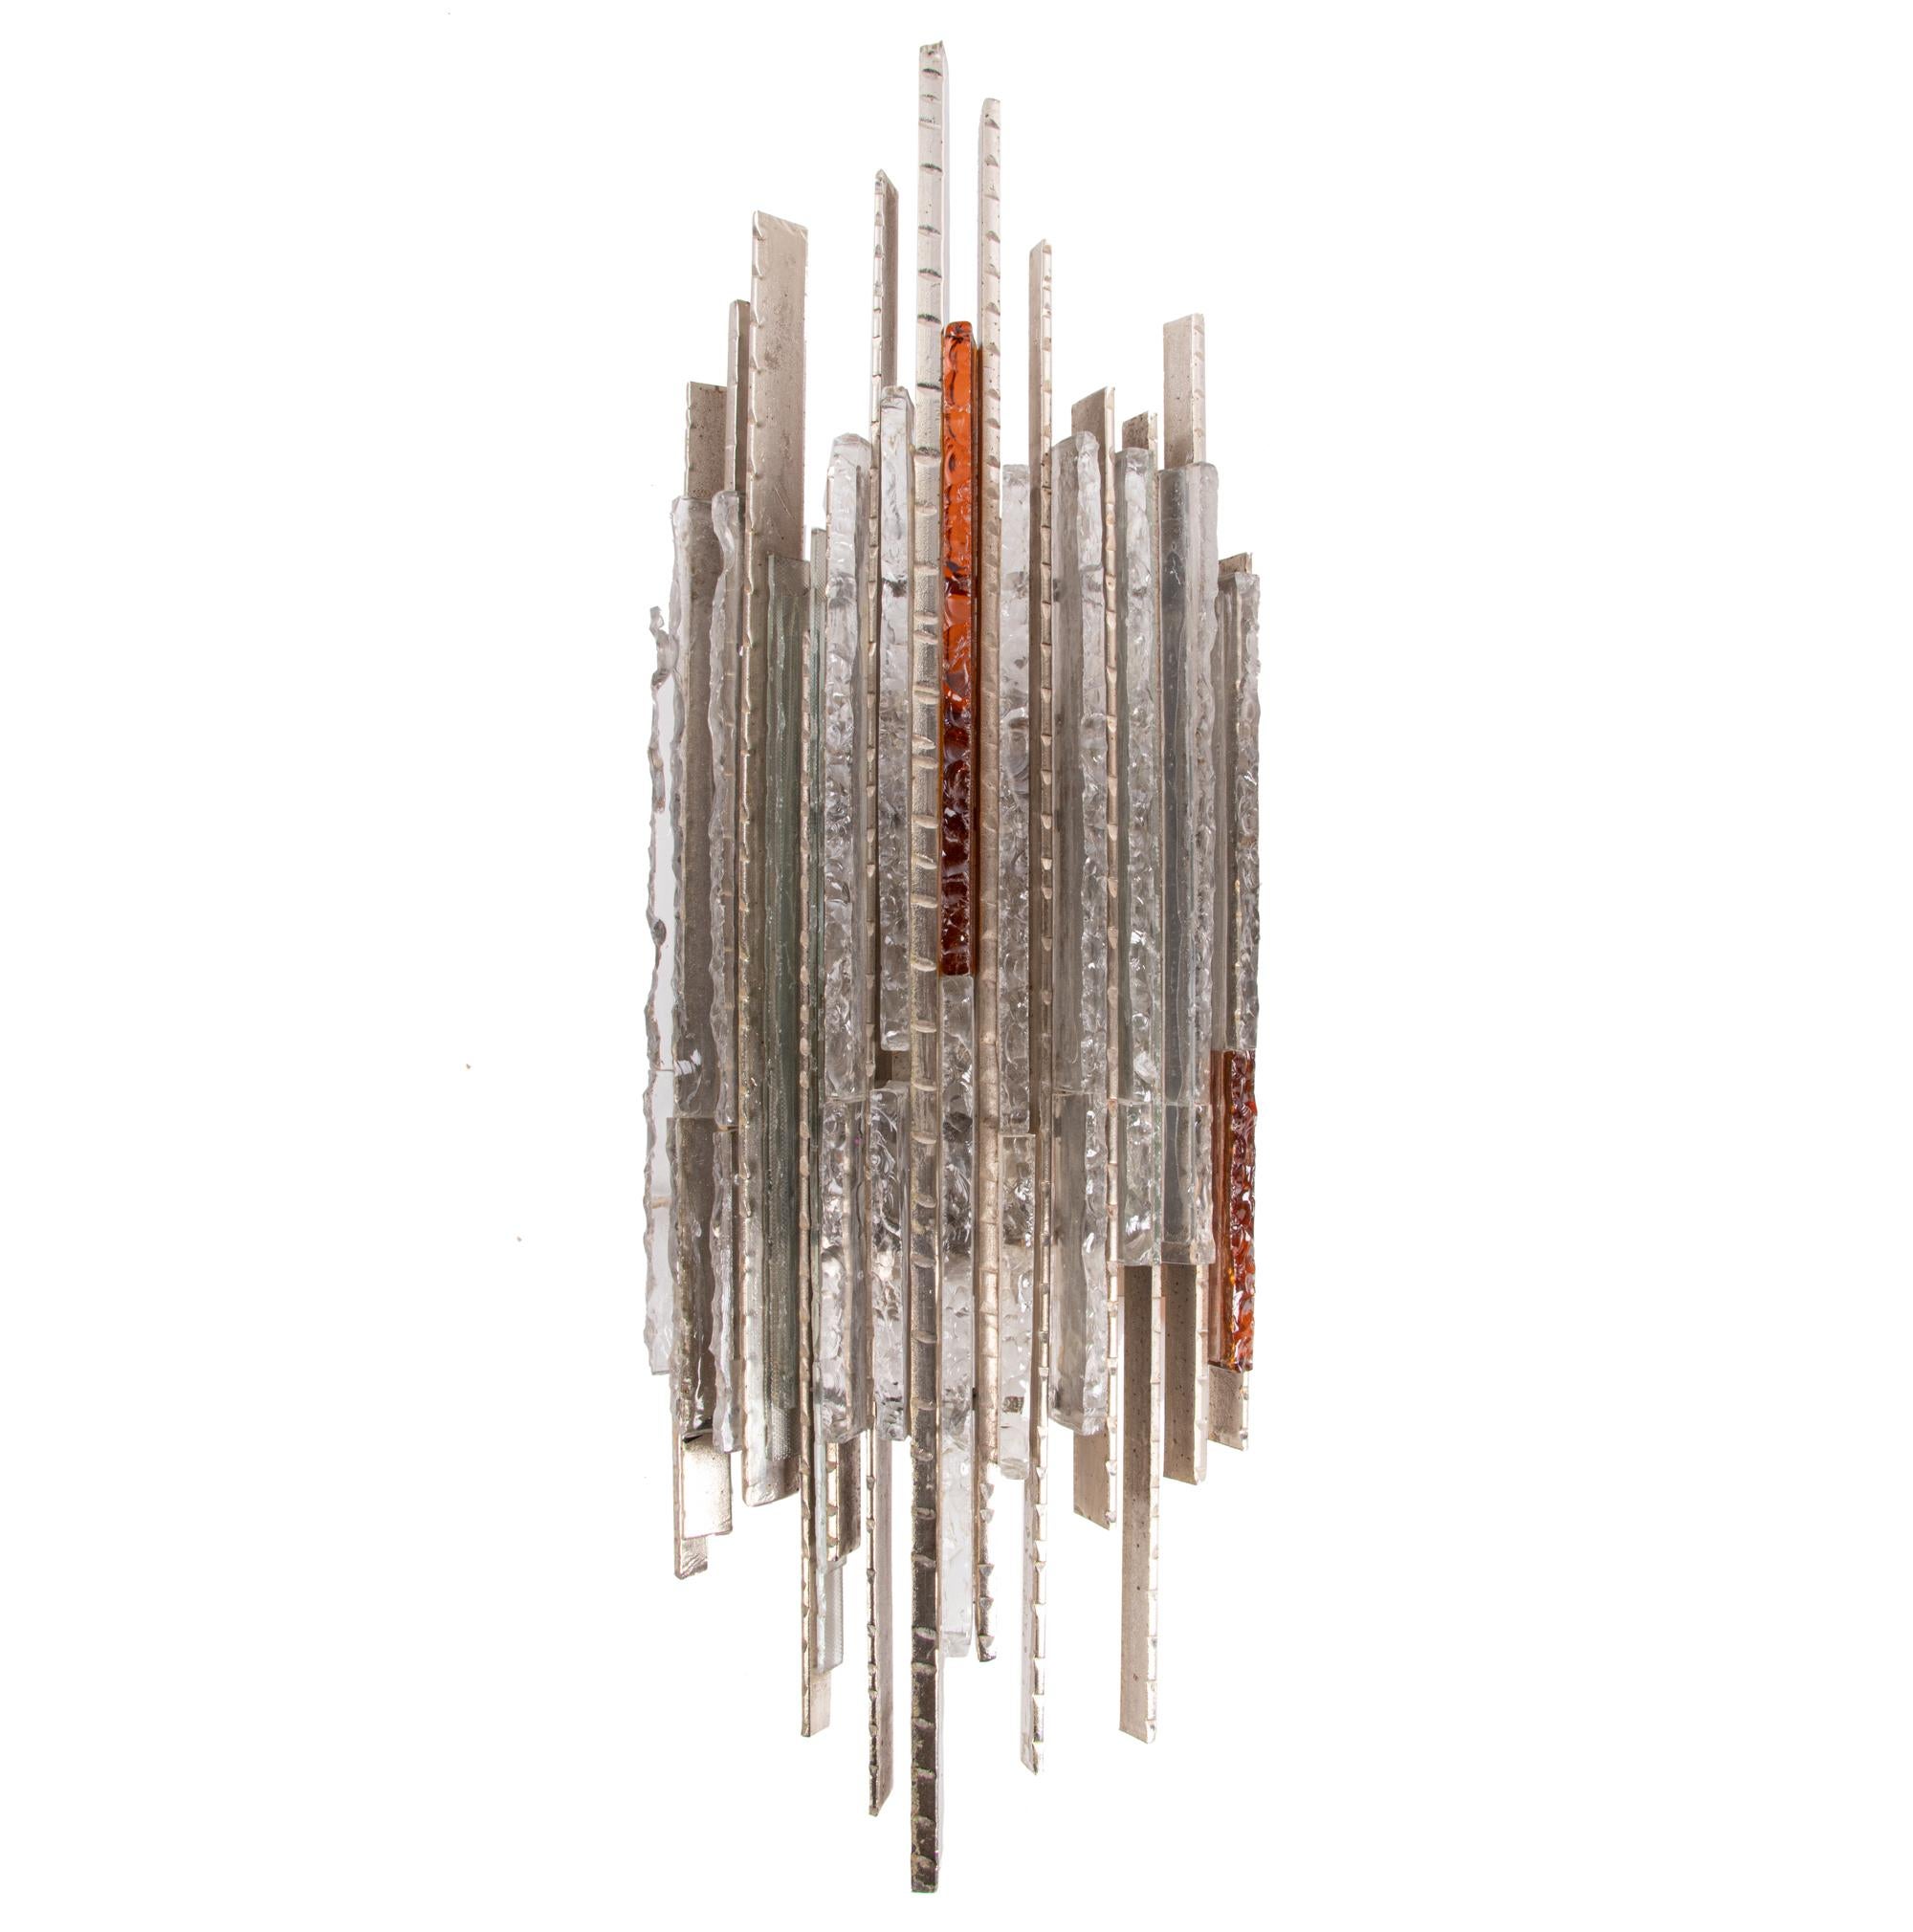 Unique and large Brutalist wall light sculpture made of amber and clear pressed glass mounted on a metal base with lighting mechanism behind. Made by Biancardi and Jordan Arte in Verona in the 1970s. 

Measures: width appr. 11.8